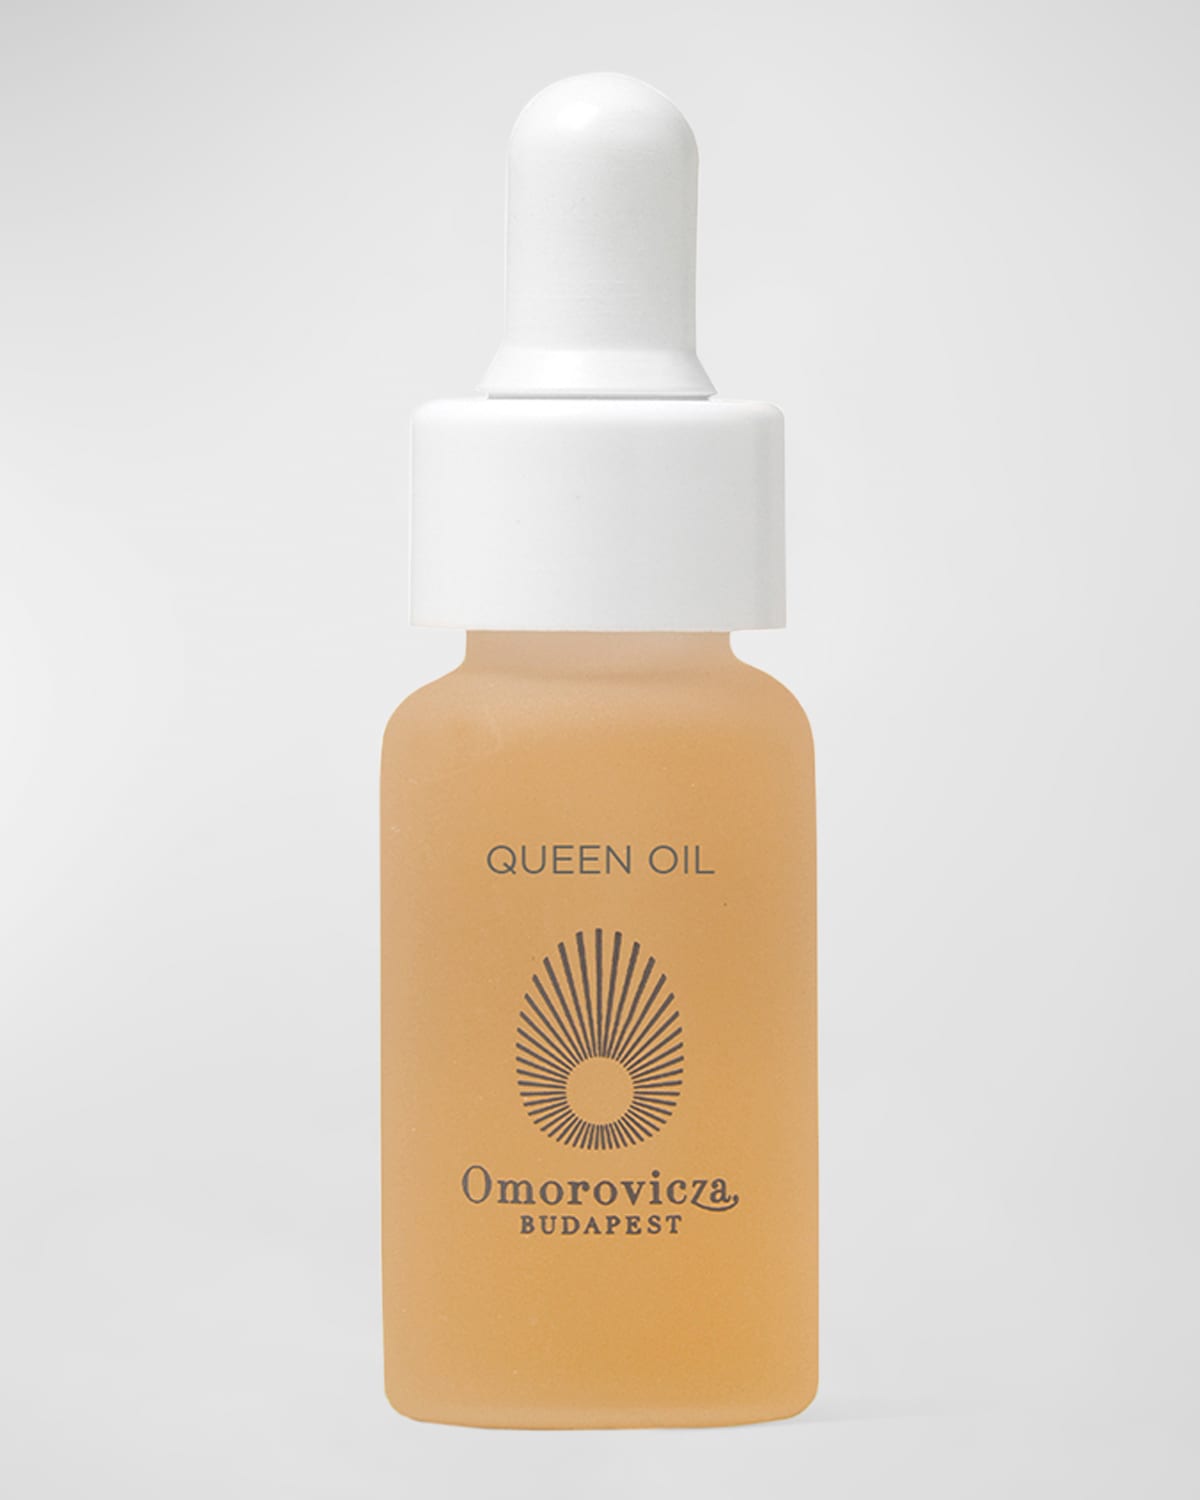 Queen Oil, 0.7 oz. Yours with any $100 Omorovicza Order